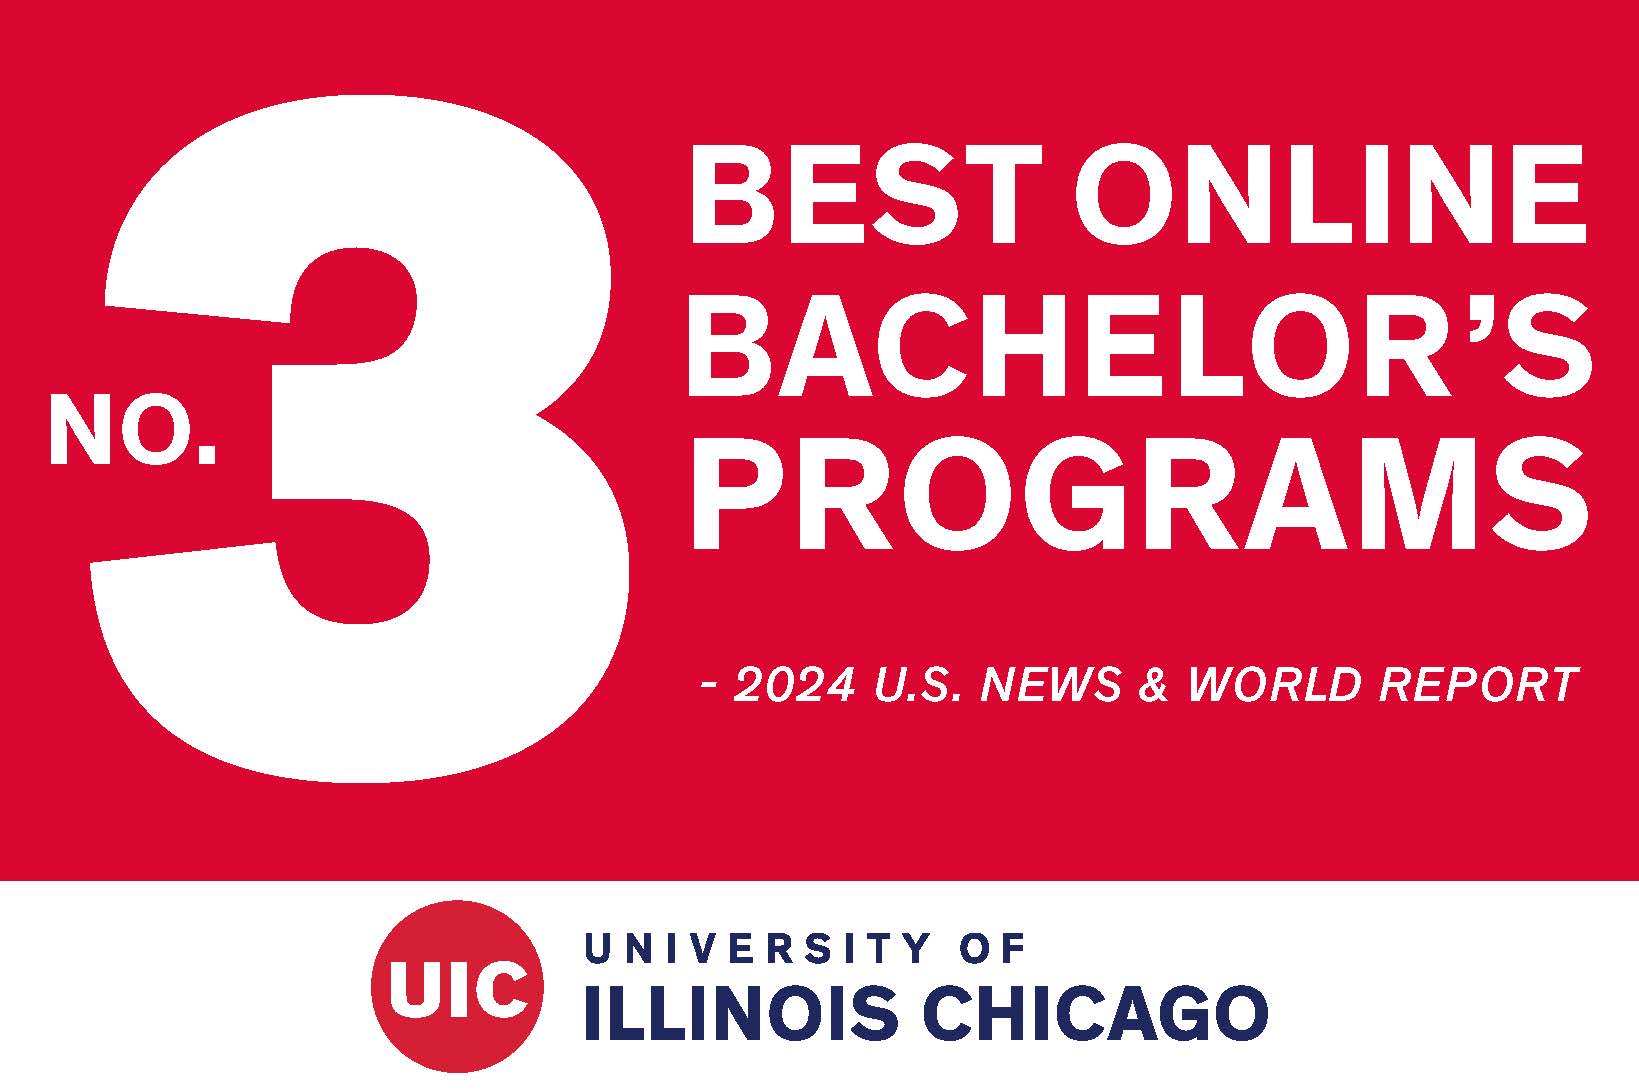 UIC No. 3 best online bachelor's programs 2024 U.S. News and World Report 